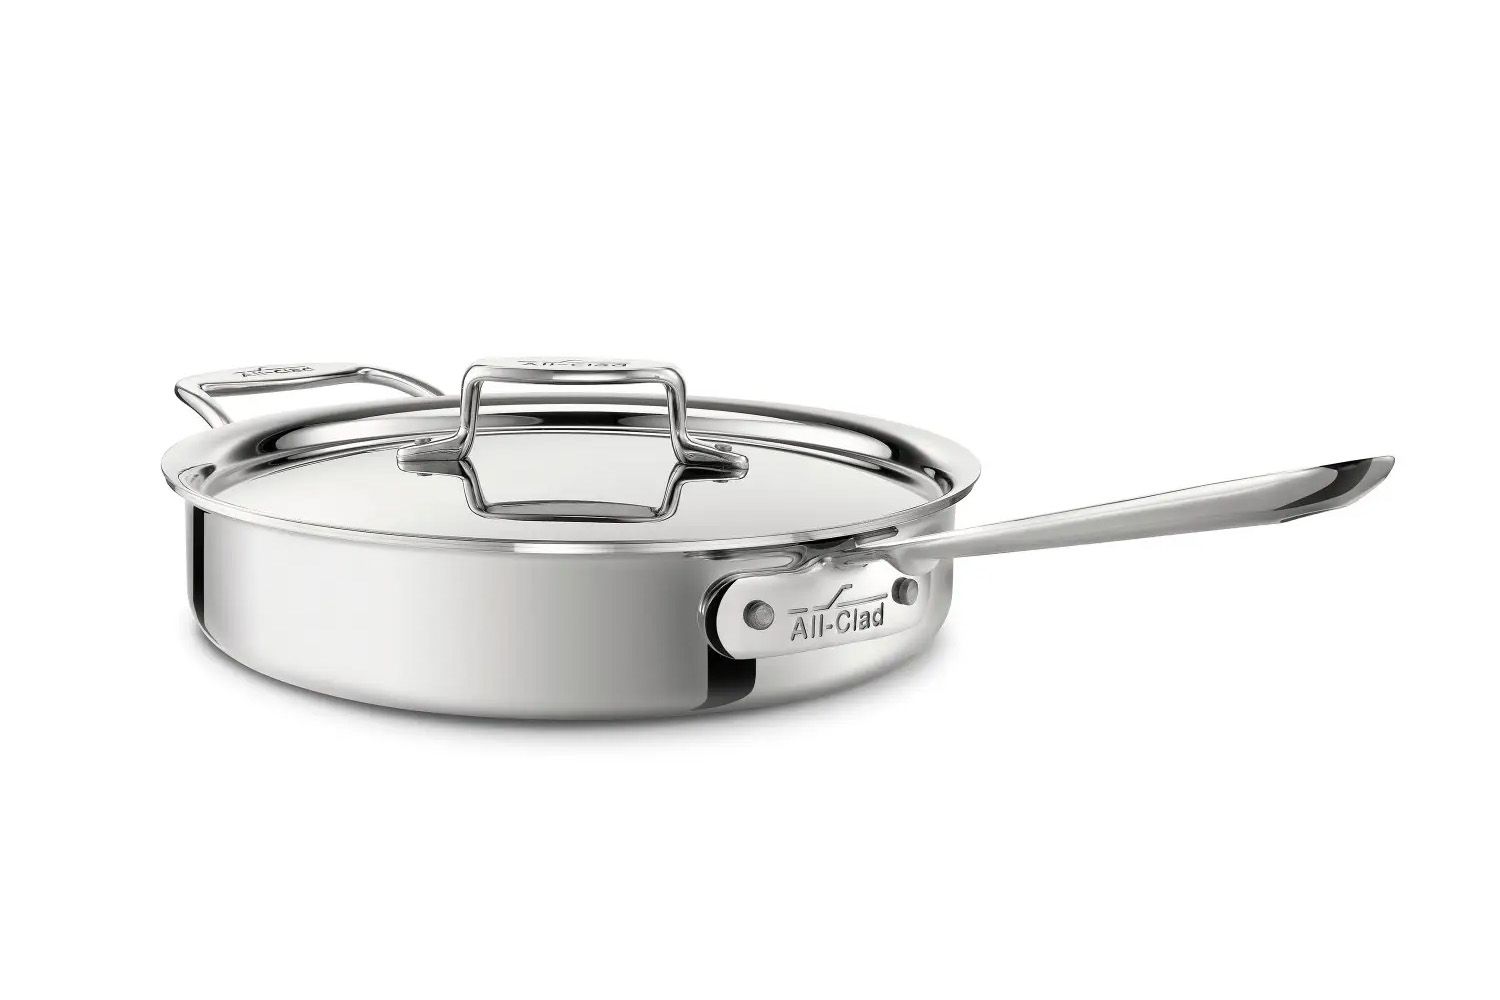 D5 Stainless Polished 5-ply Bonded Cookware, Saute Pan with lid, 3 quart